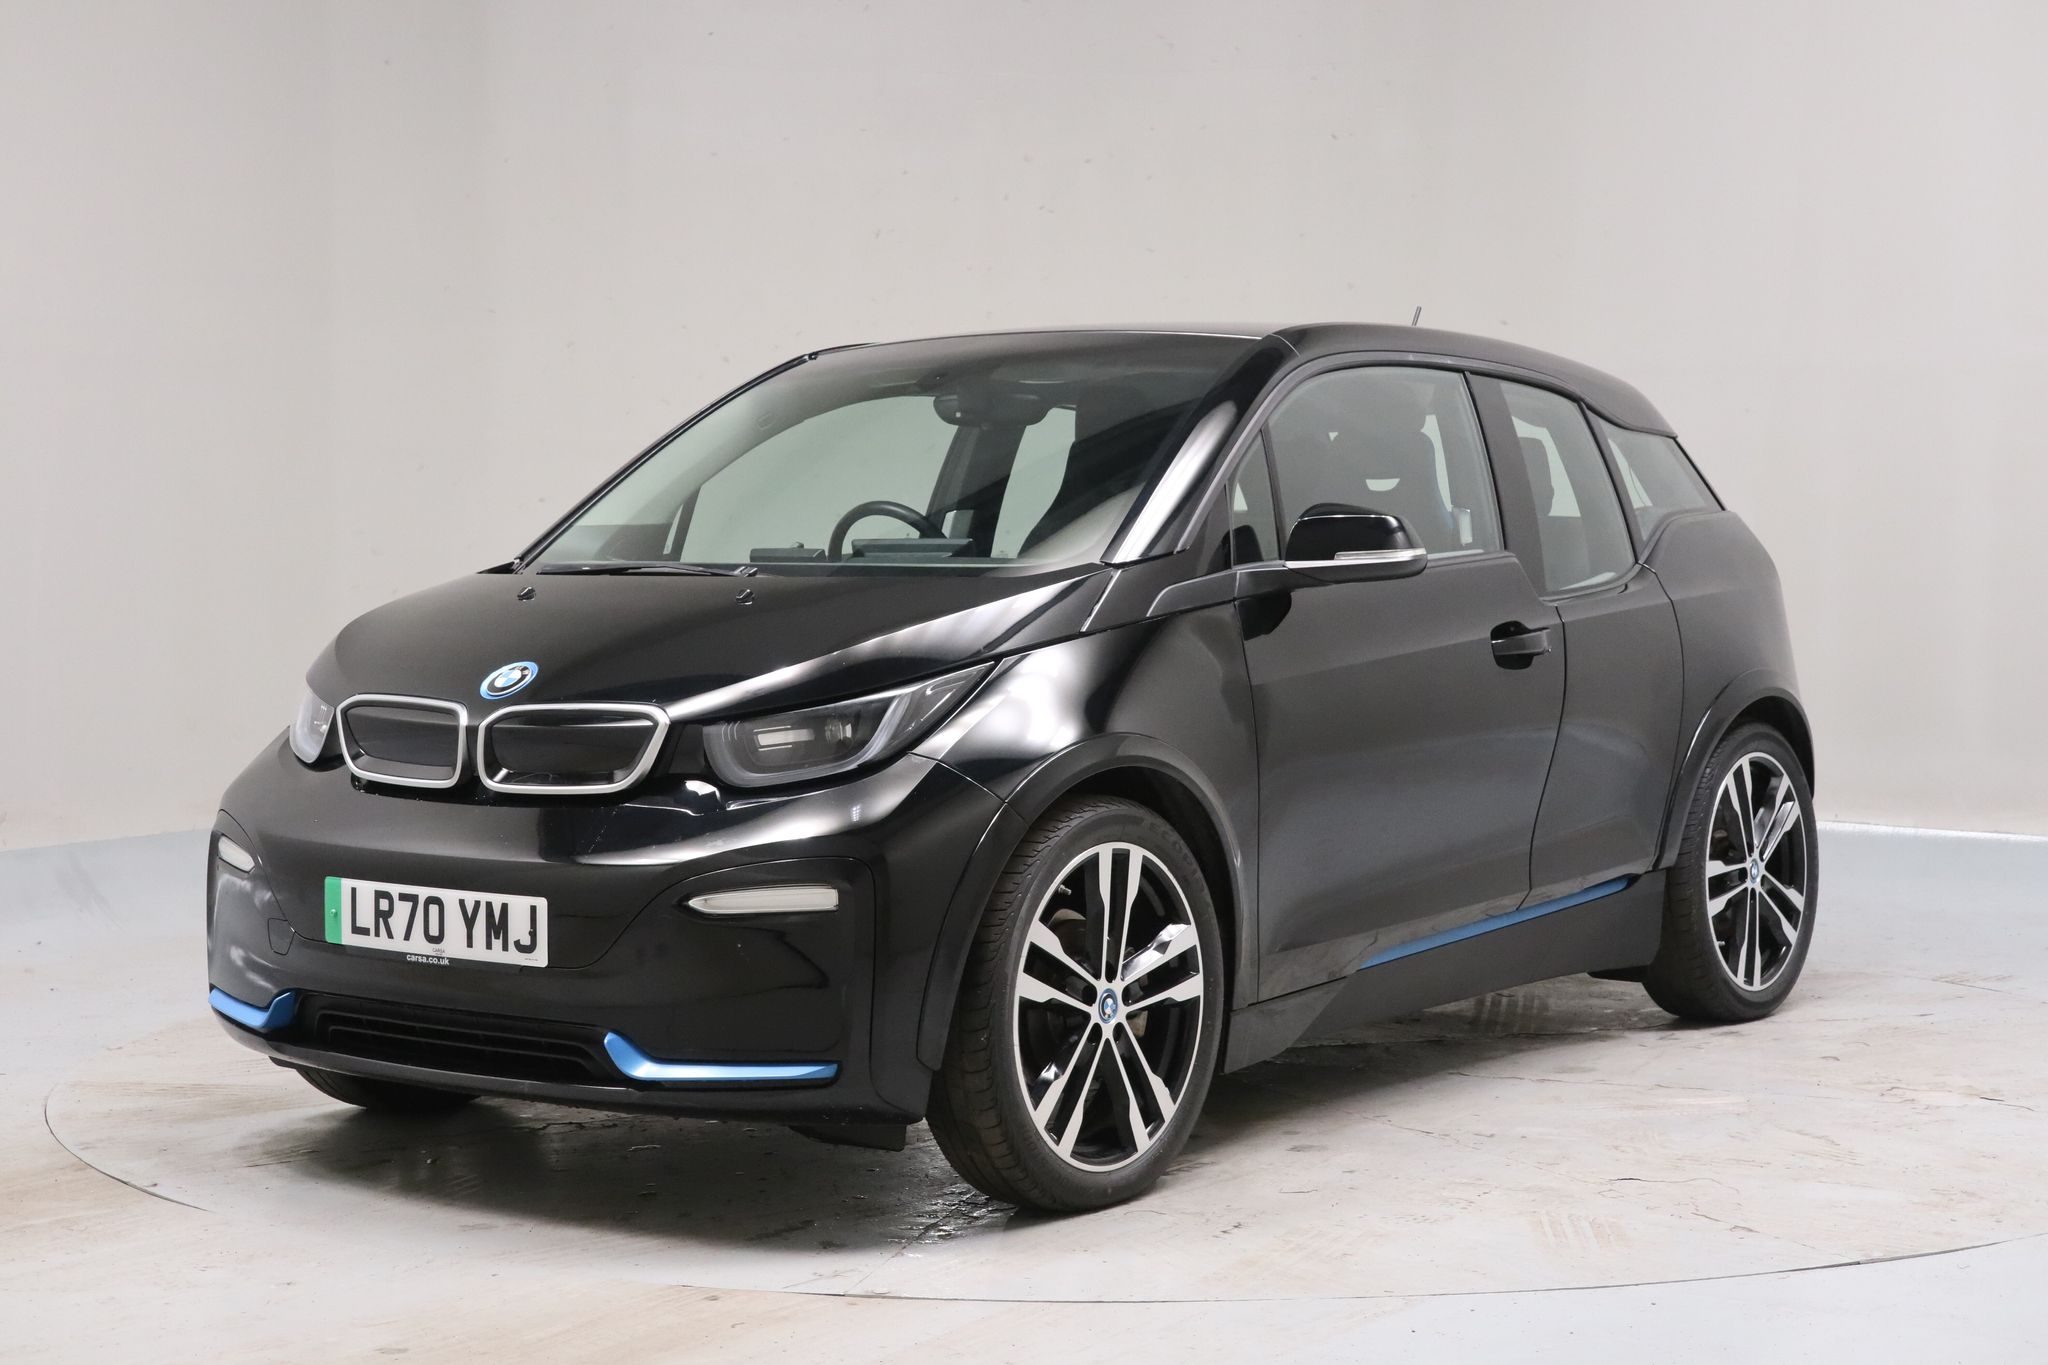 2020 used BMW i3 42.2kWh S (184 ps)